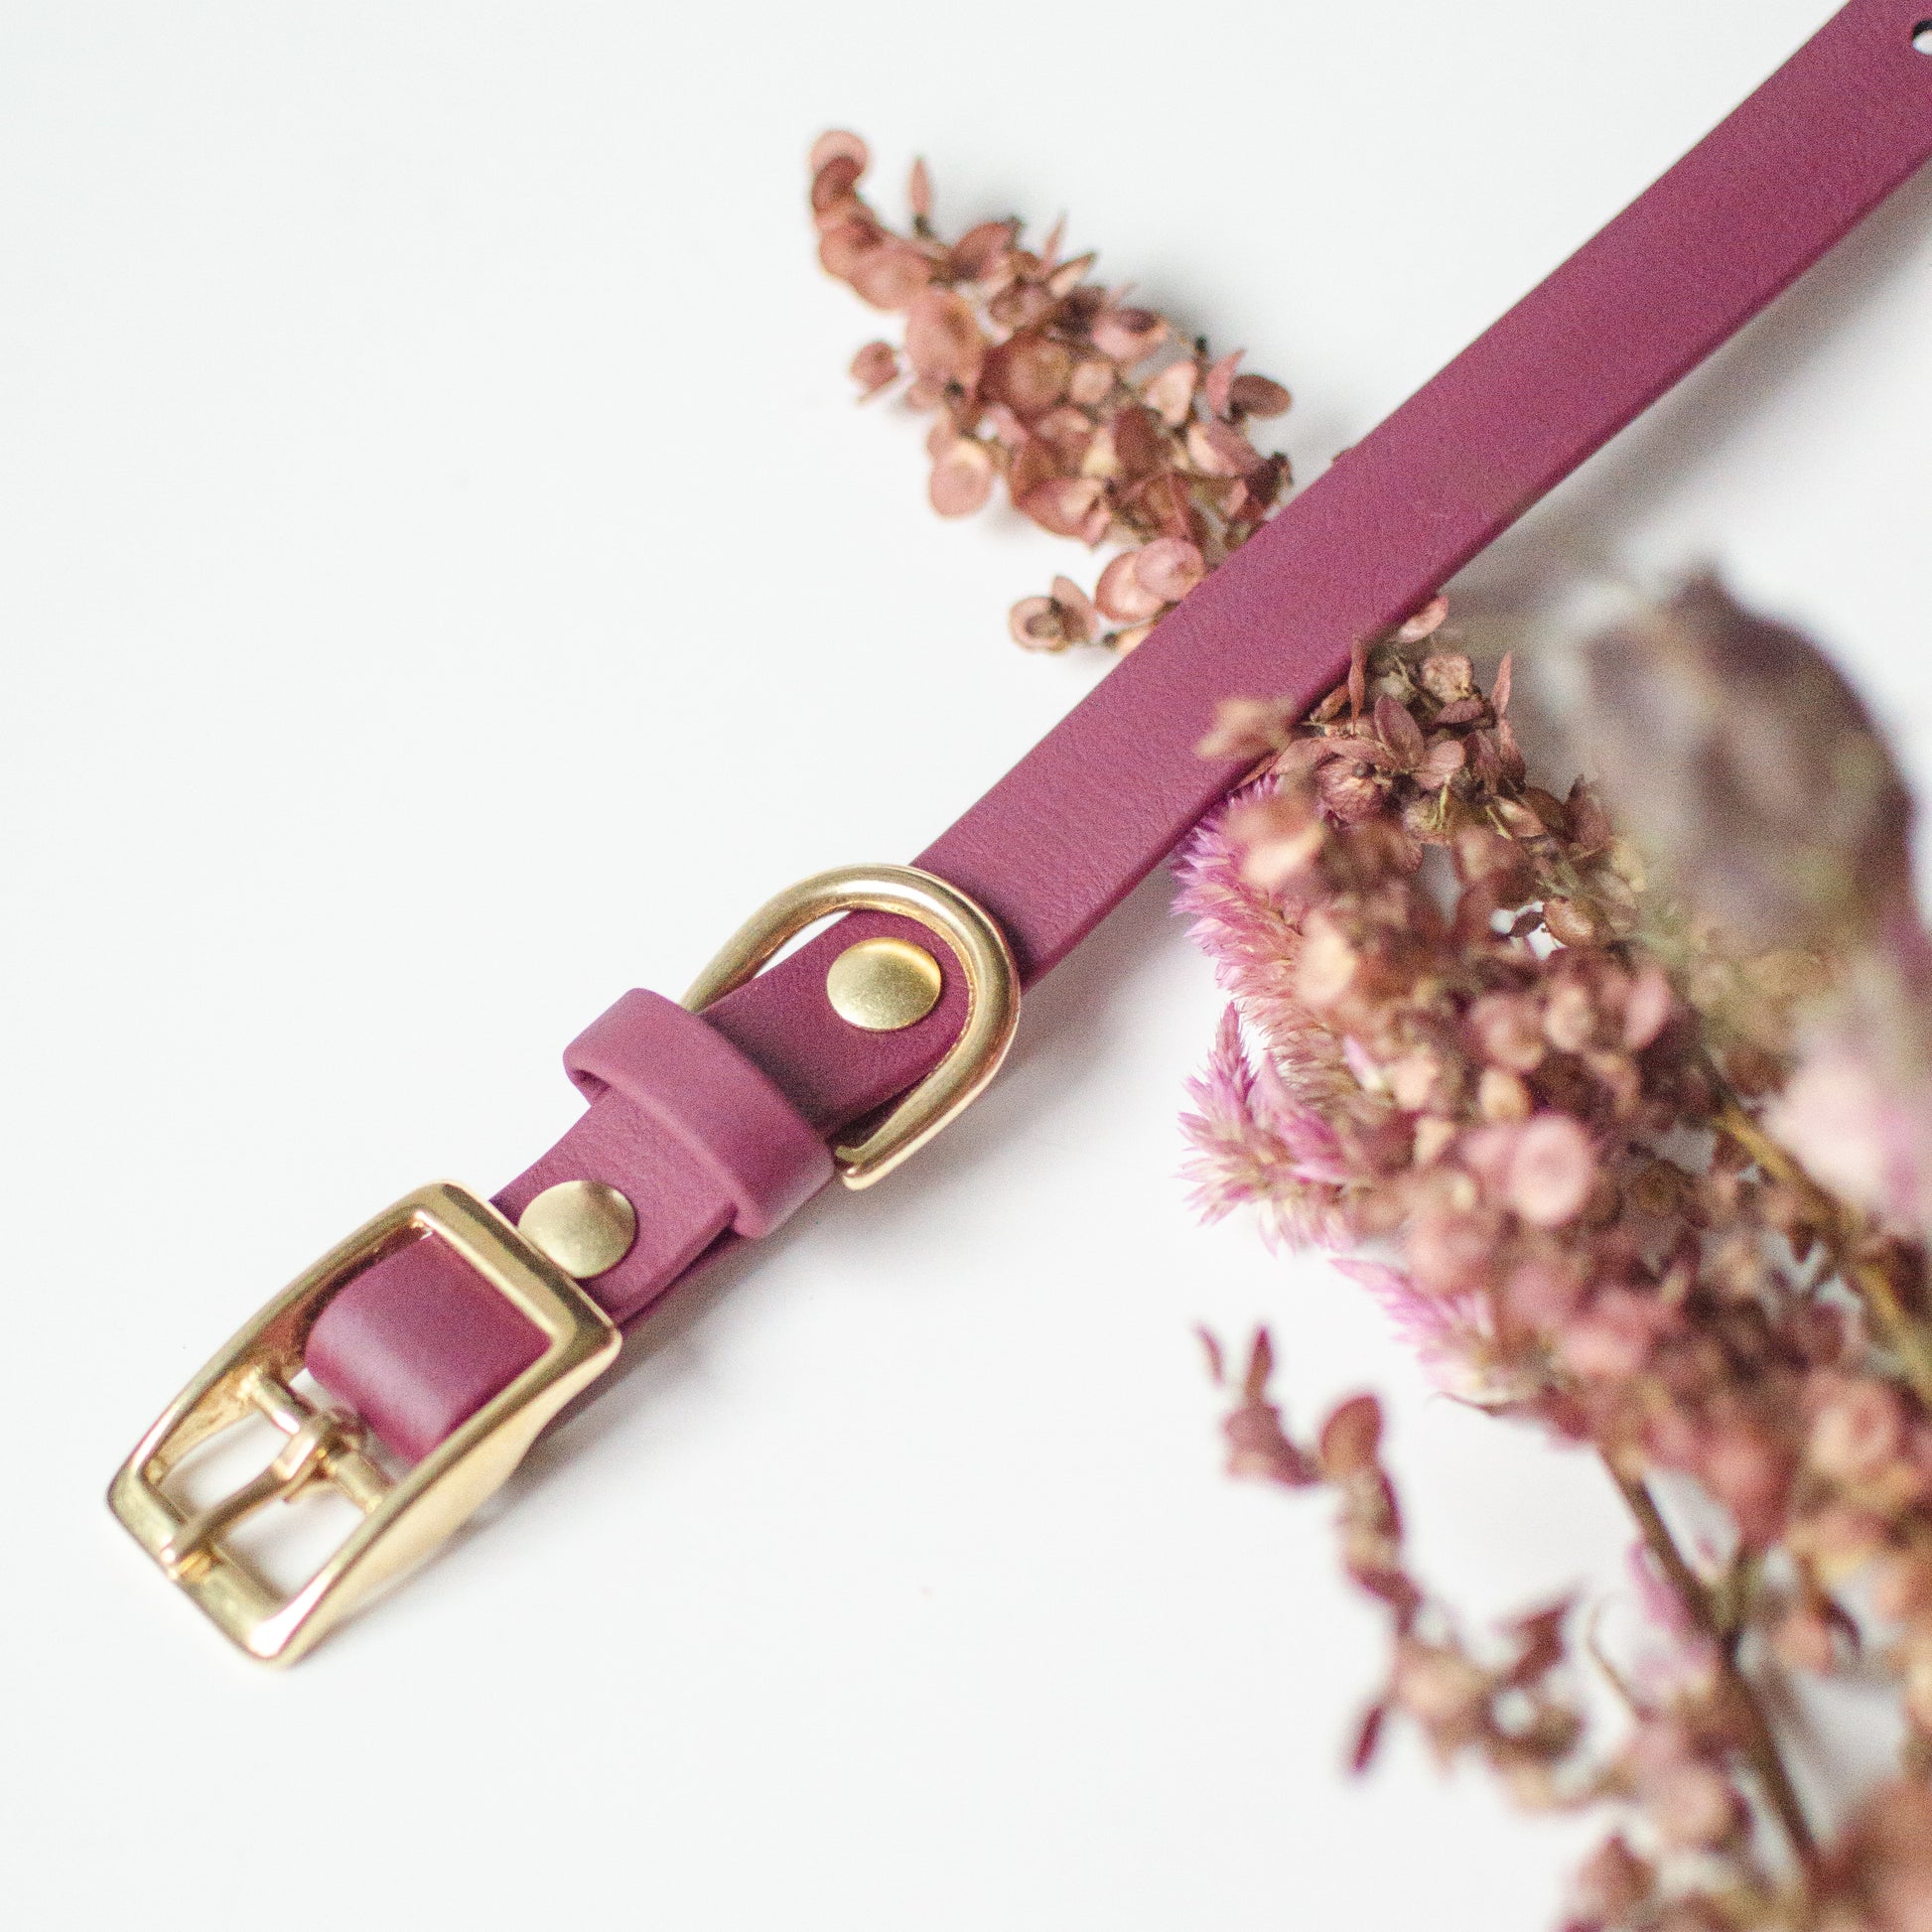 Wanderlust Pup Co. biothane dog collars are waterproof, odour-resistant, and ready for a walk in the city, hike in the woods, or a day at the beach. Made of Biothane with solid brass hardware. Handmade  British Columbia, Canada